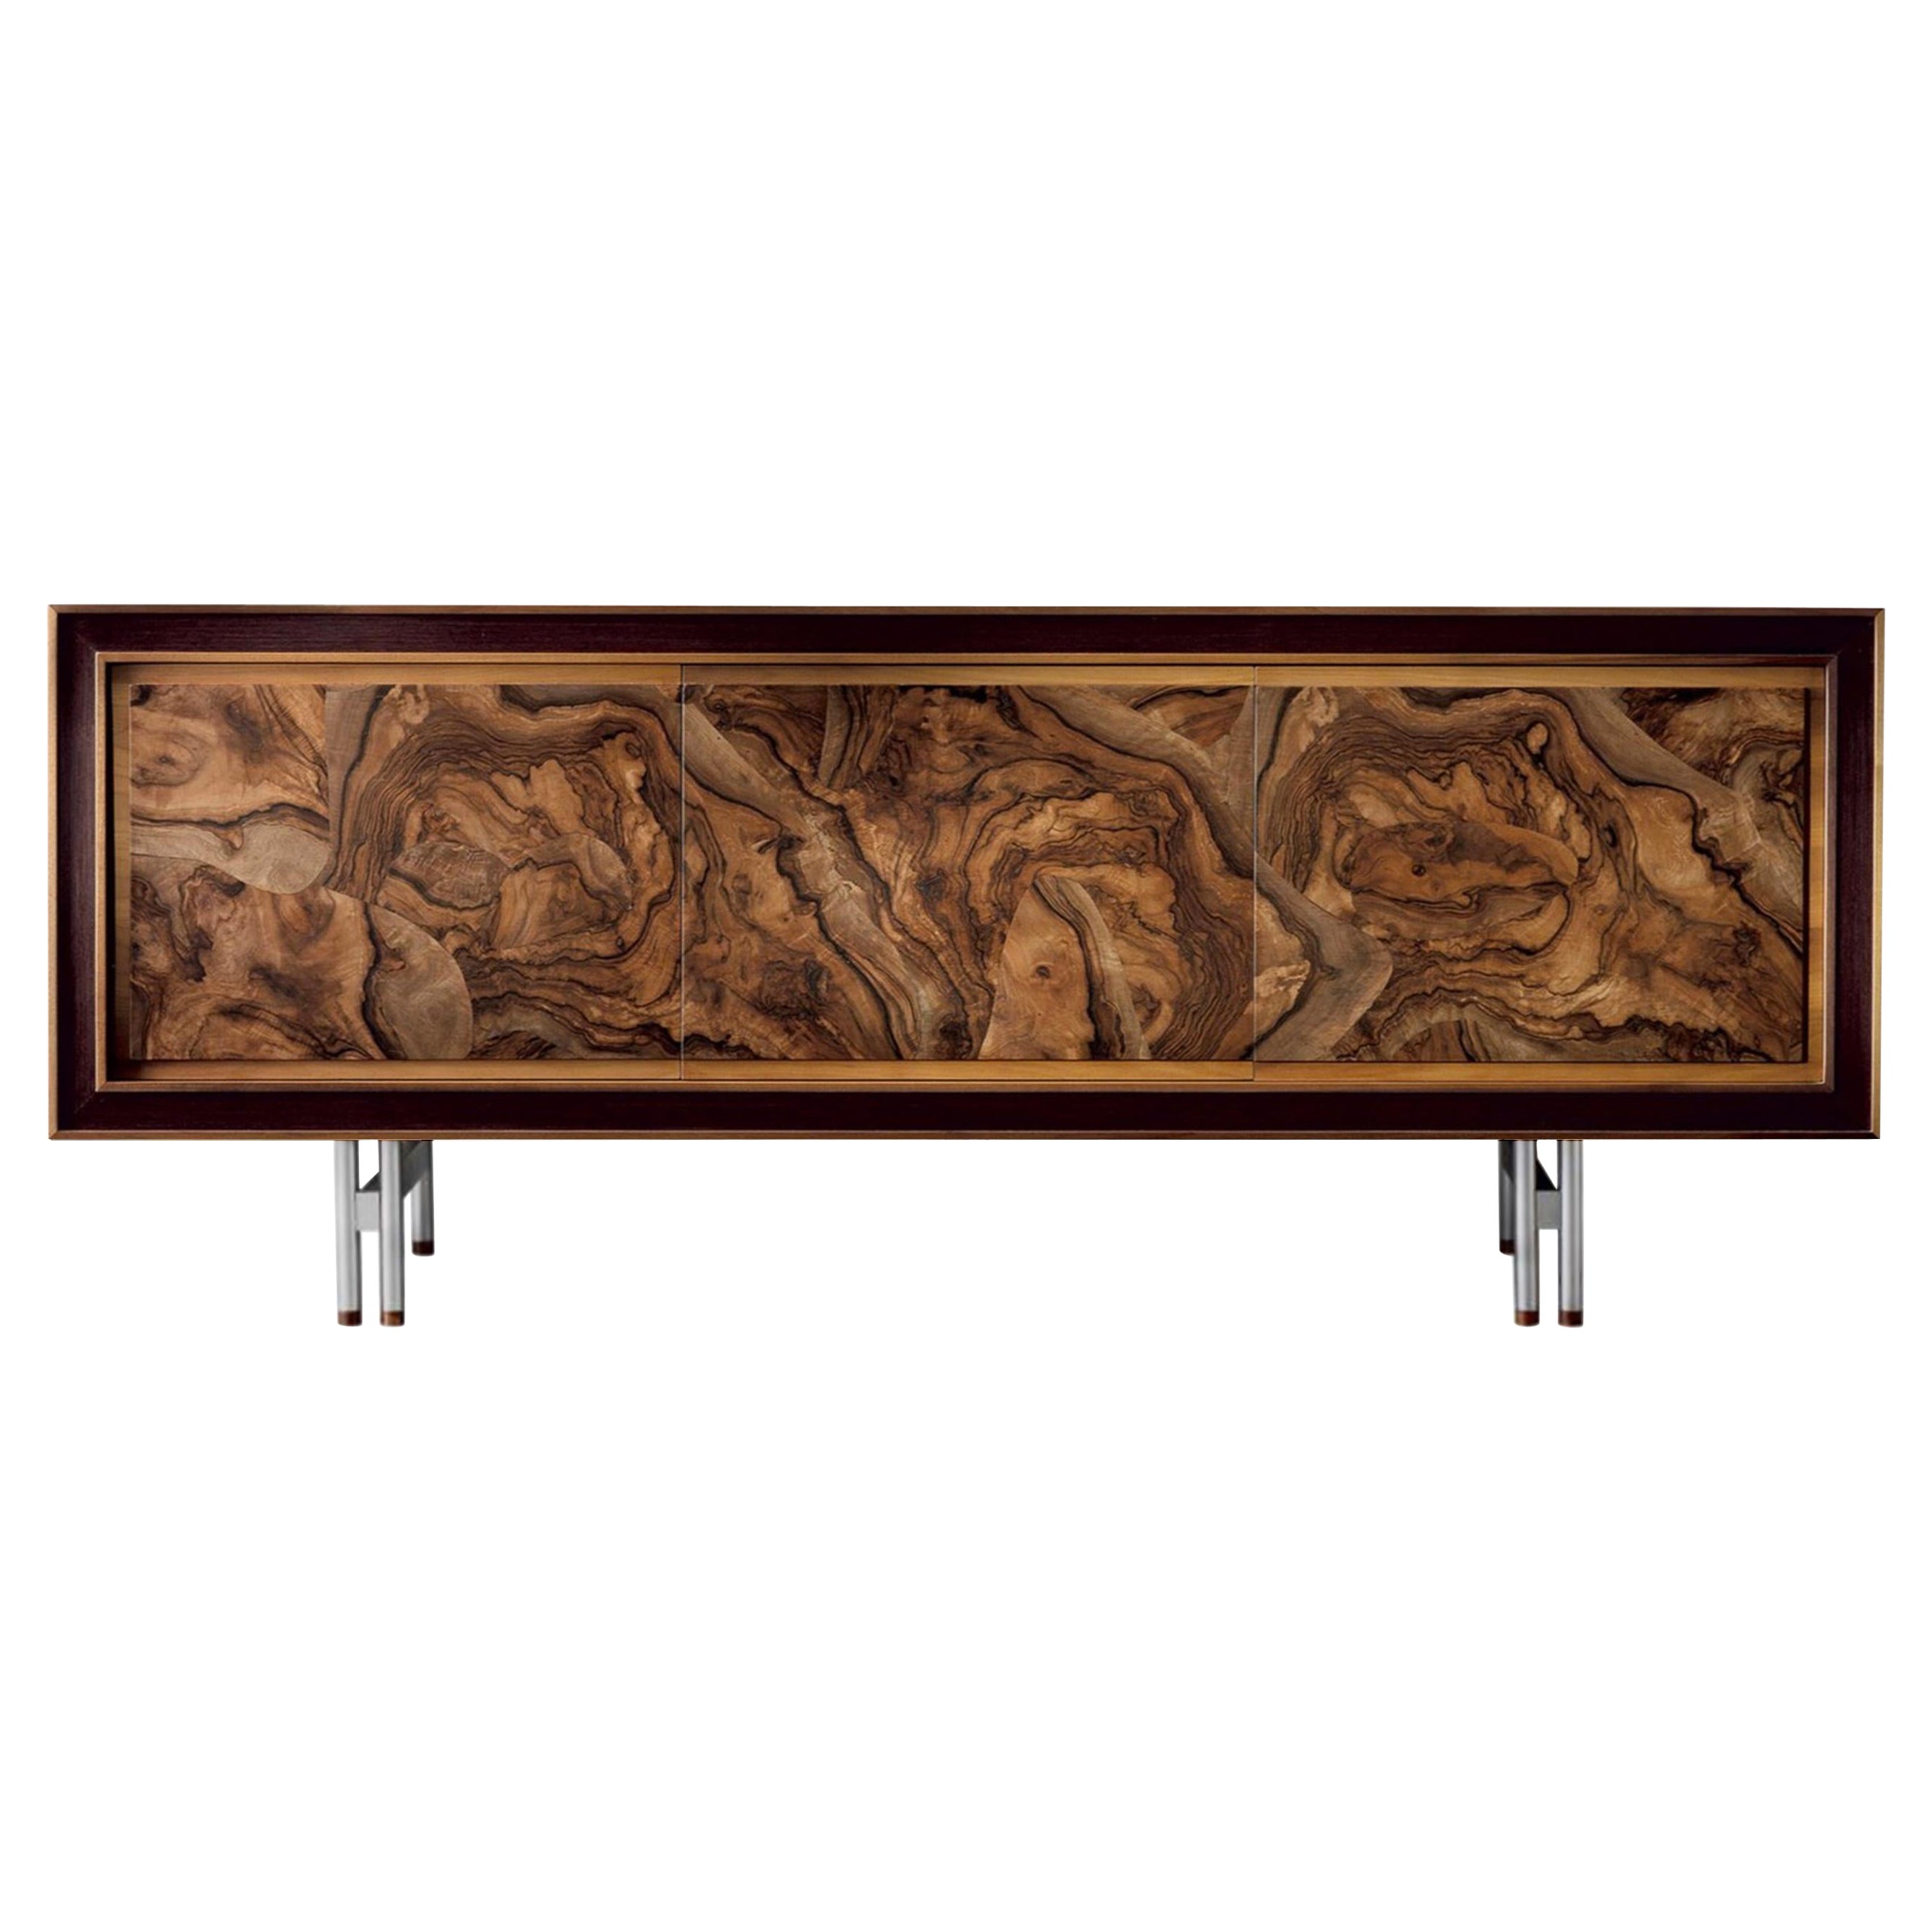 Quadra Solid Wood Sideboard, Walnut, Briar in Natural Finish, Contemporary